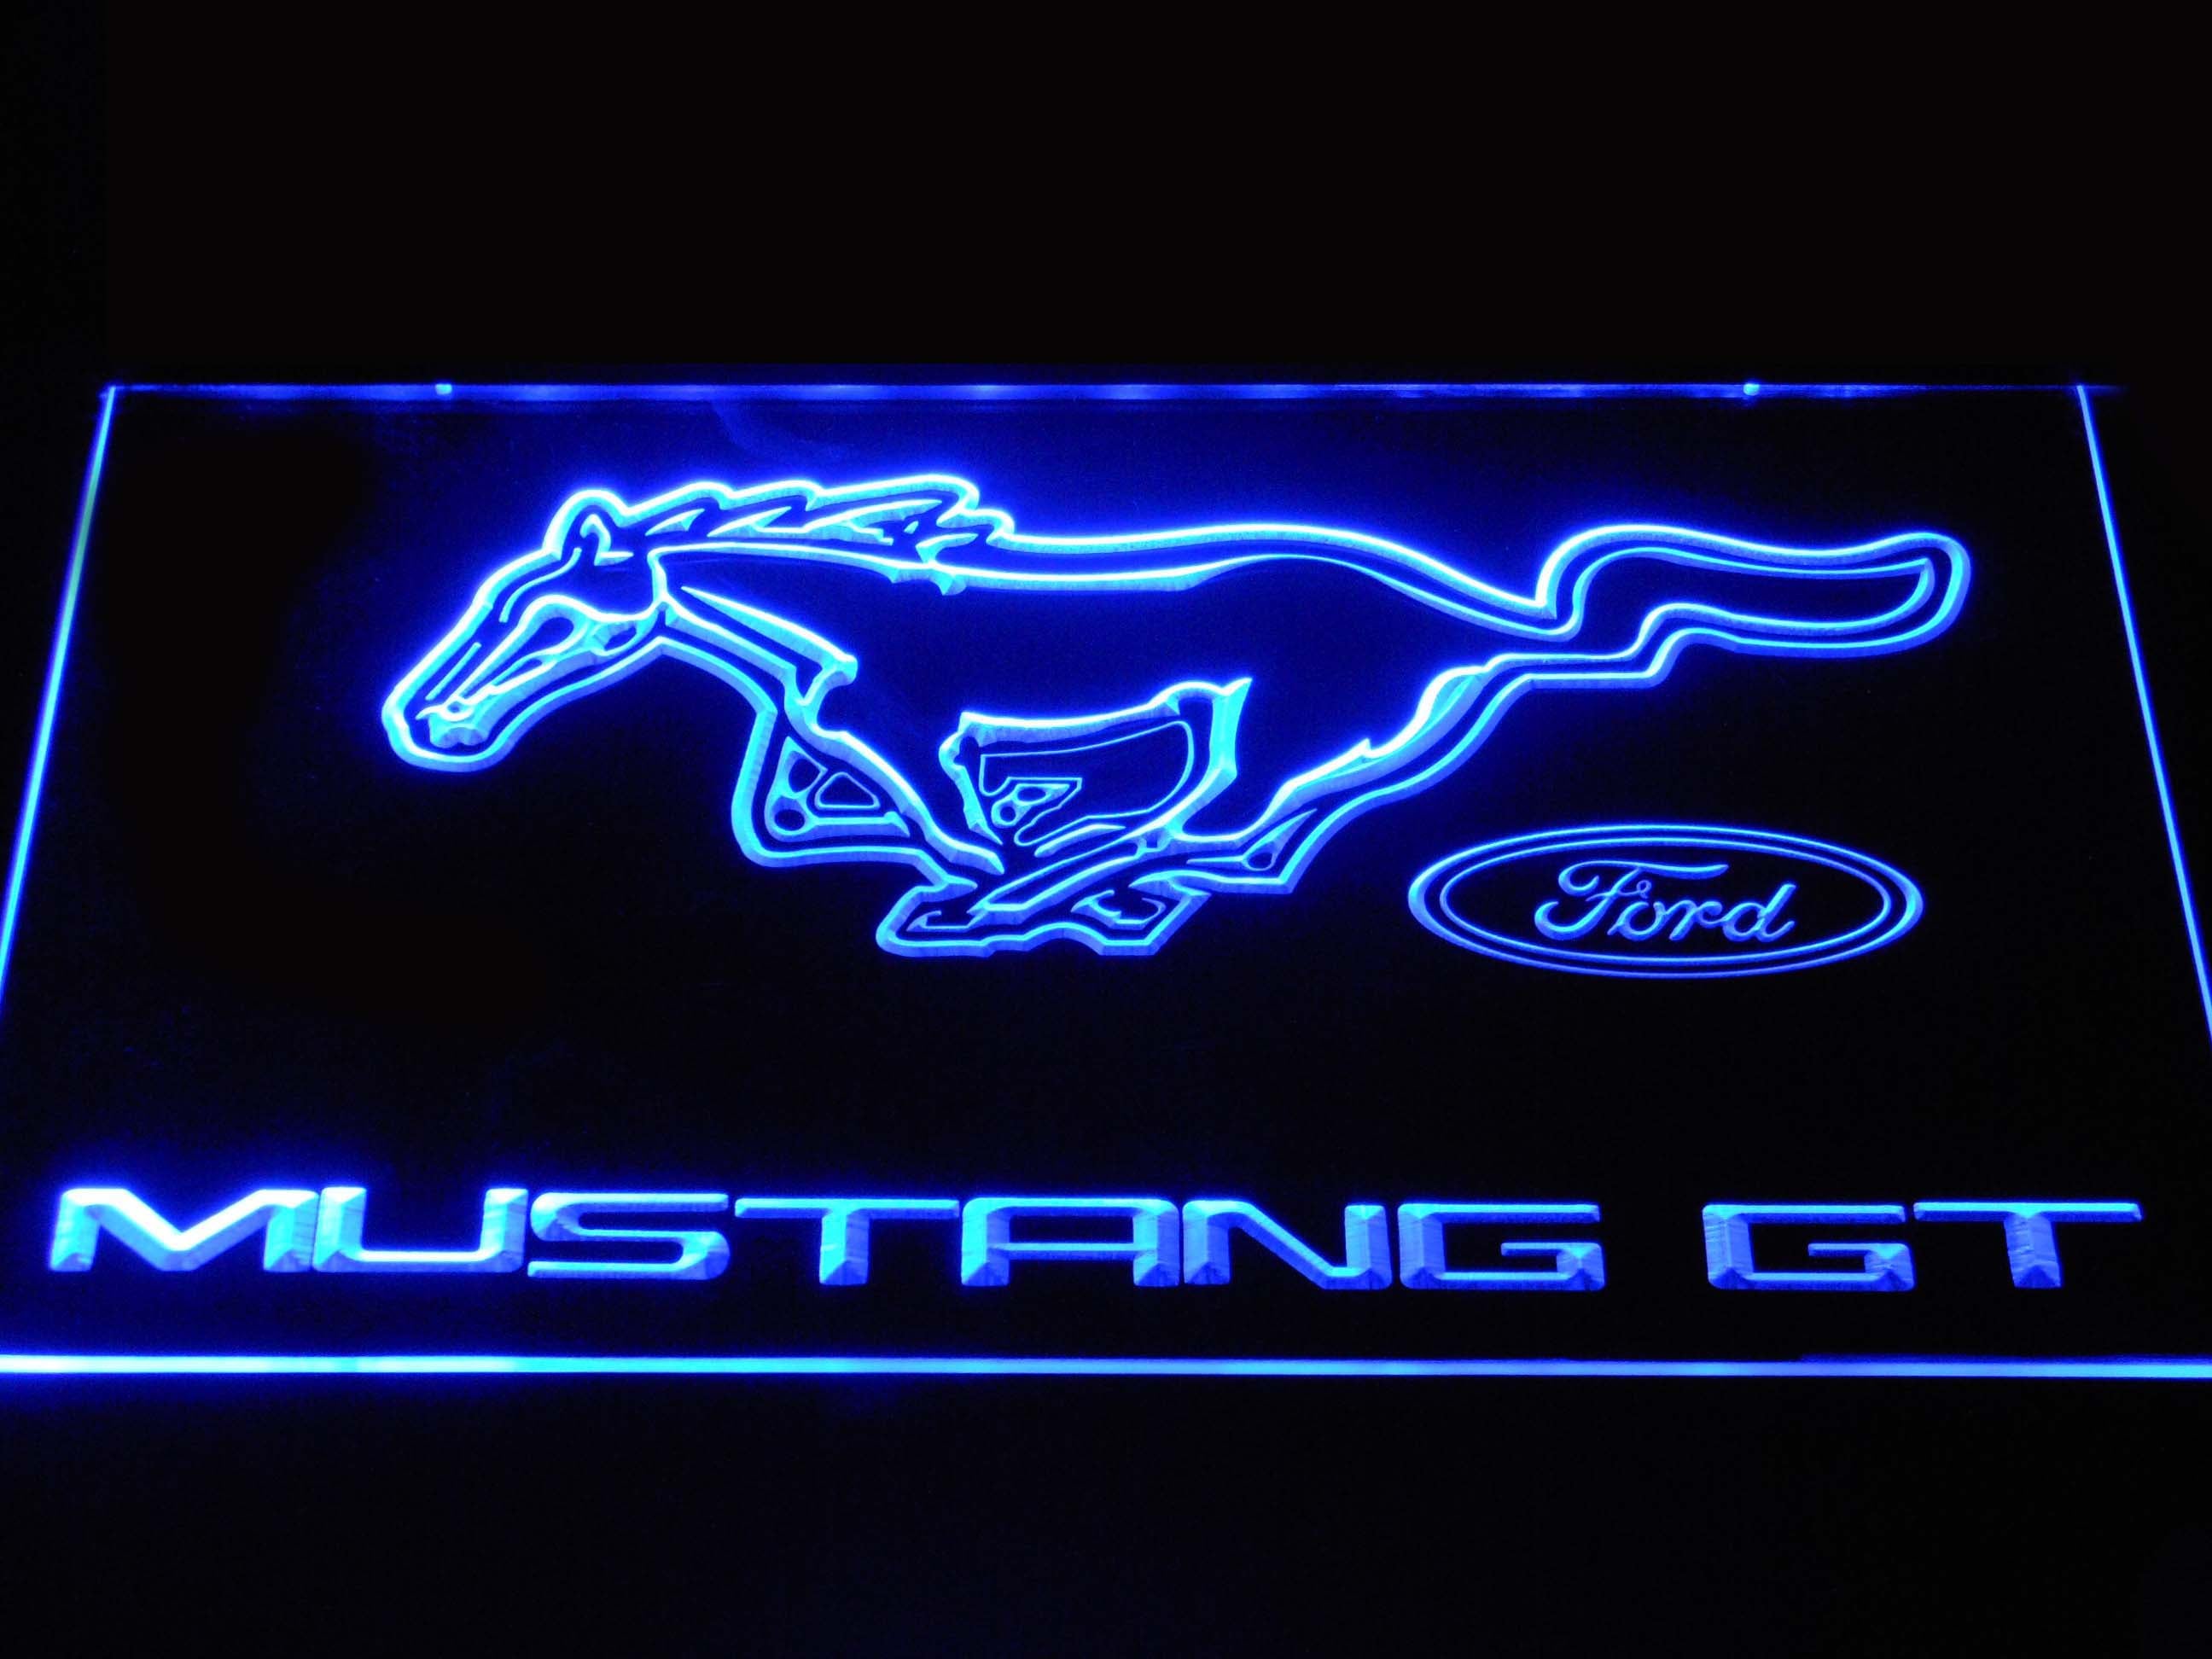 Ford Mustang GT Neon Light LED Sign